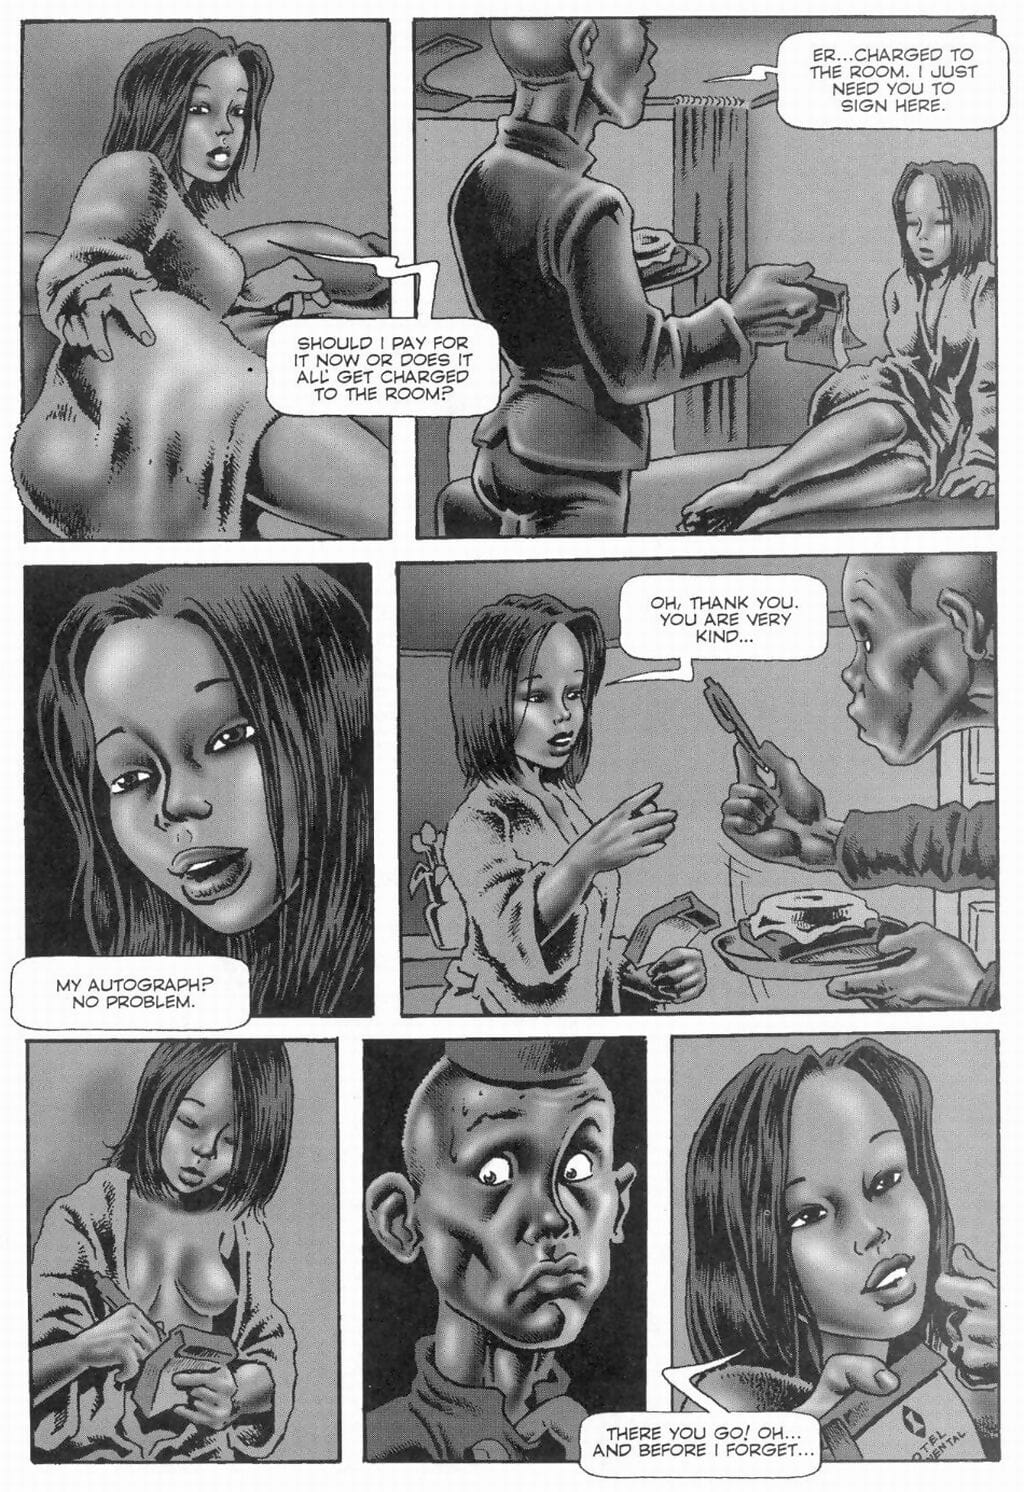 Alraune #2 page 1